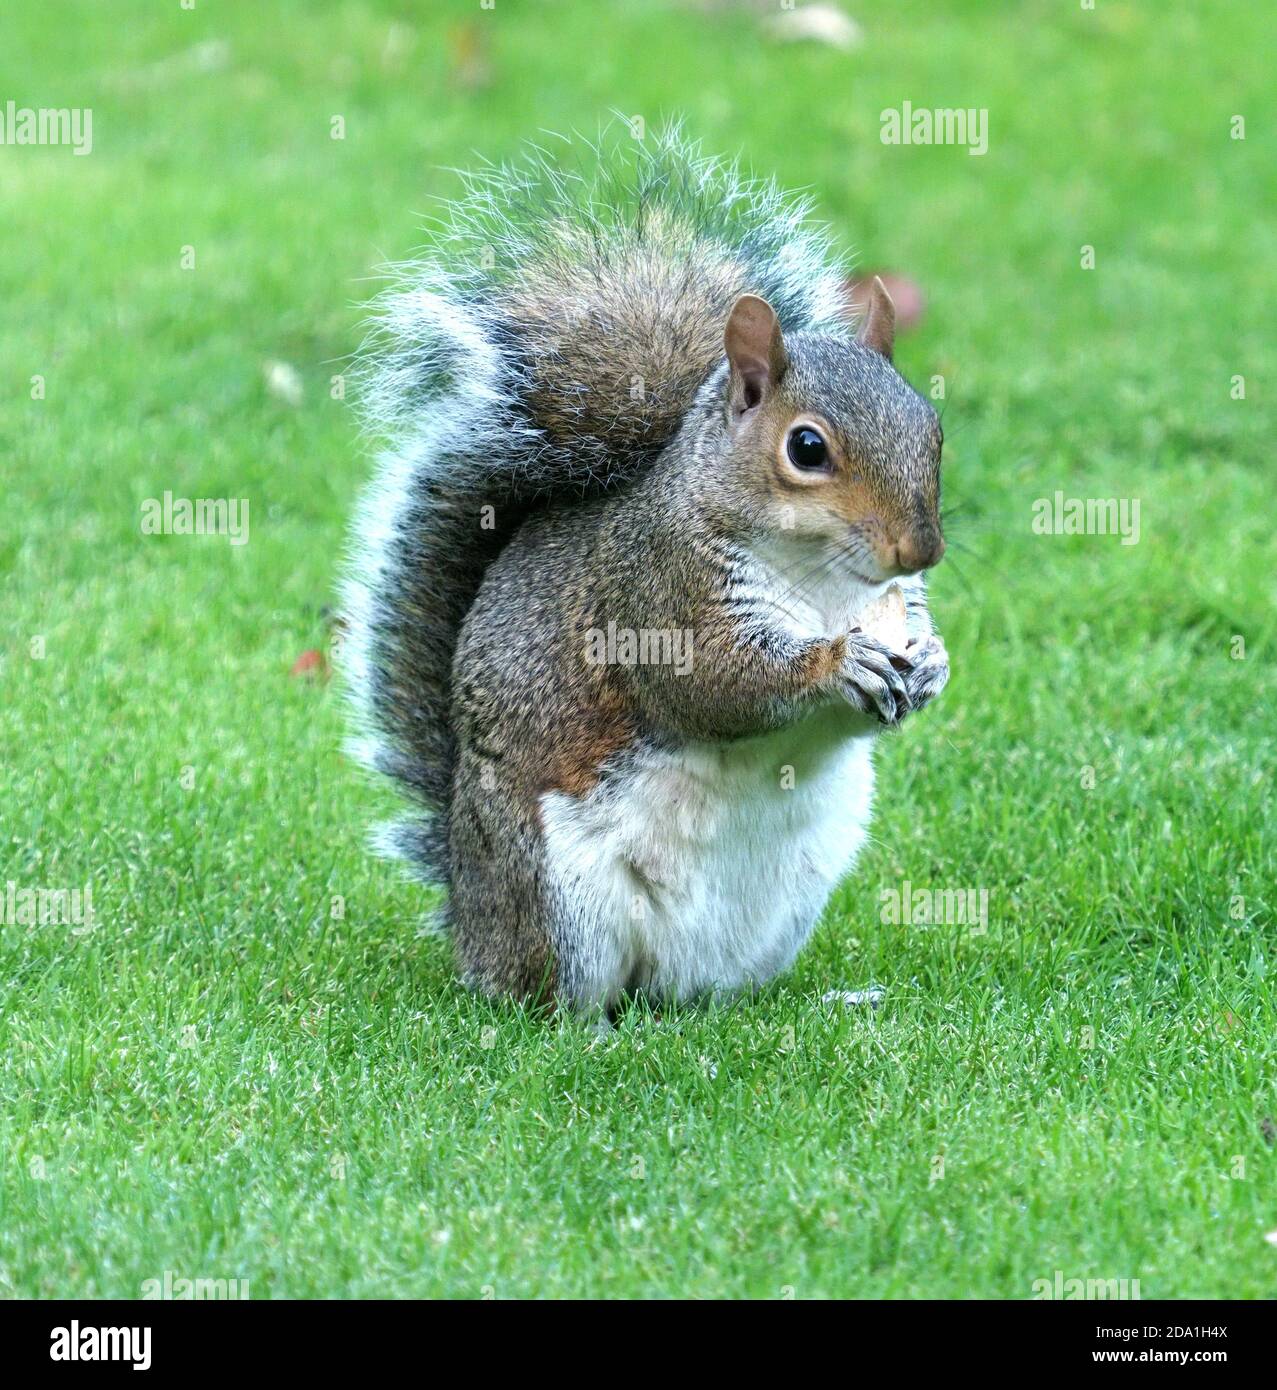 A grey squirrel witting on grass eating a piece of bread Stock Photo